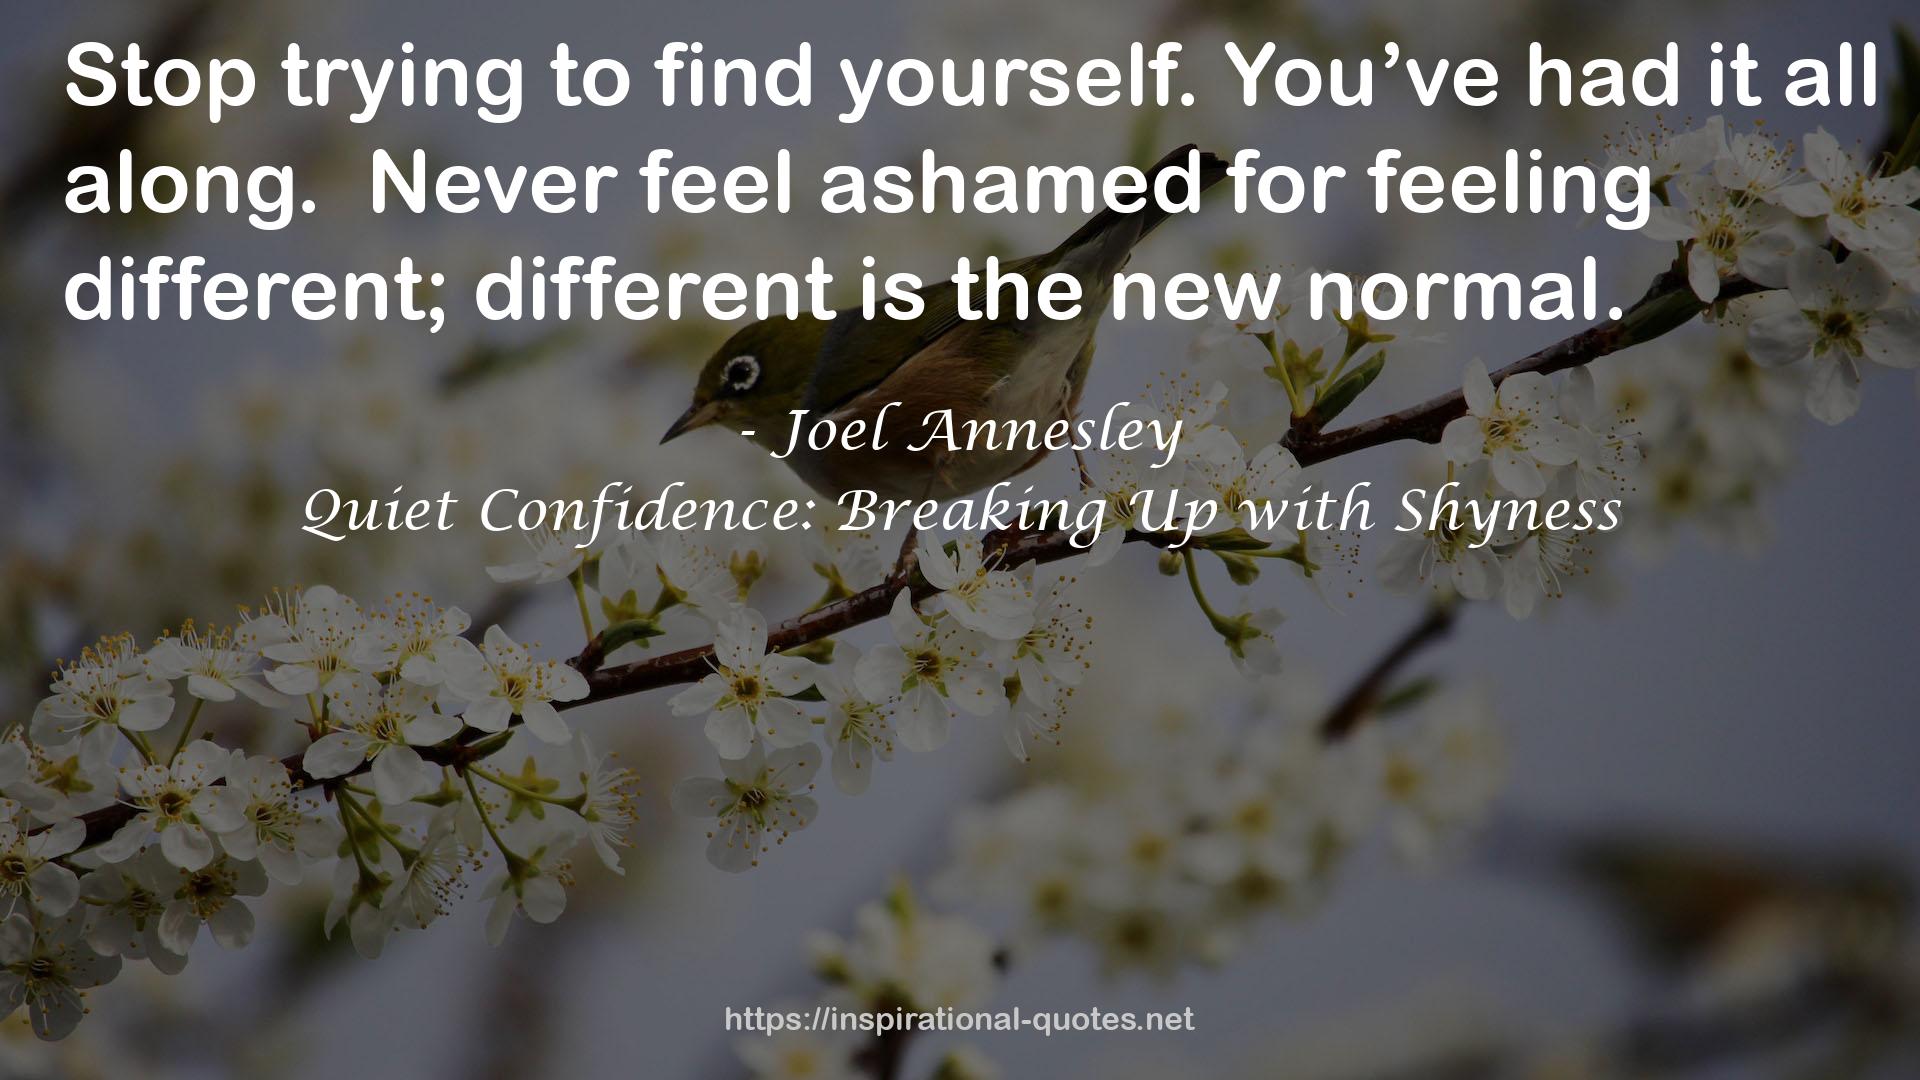 Quiet Confidence: Breaking Up with Shyness QUOTES